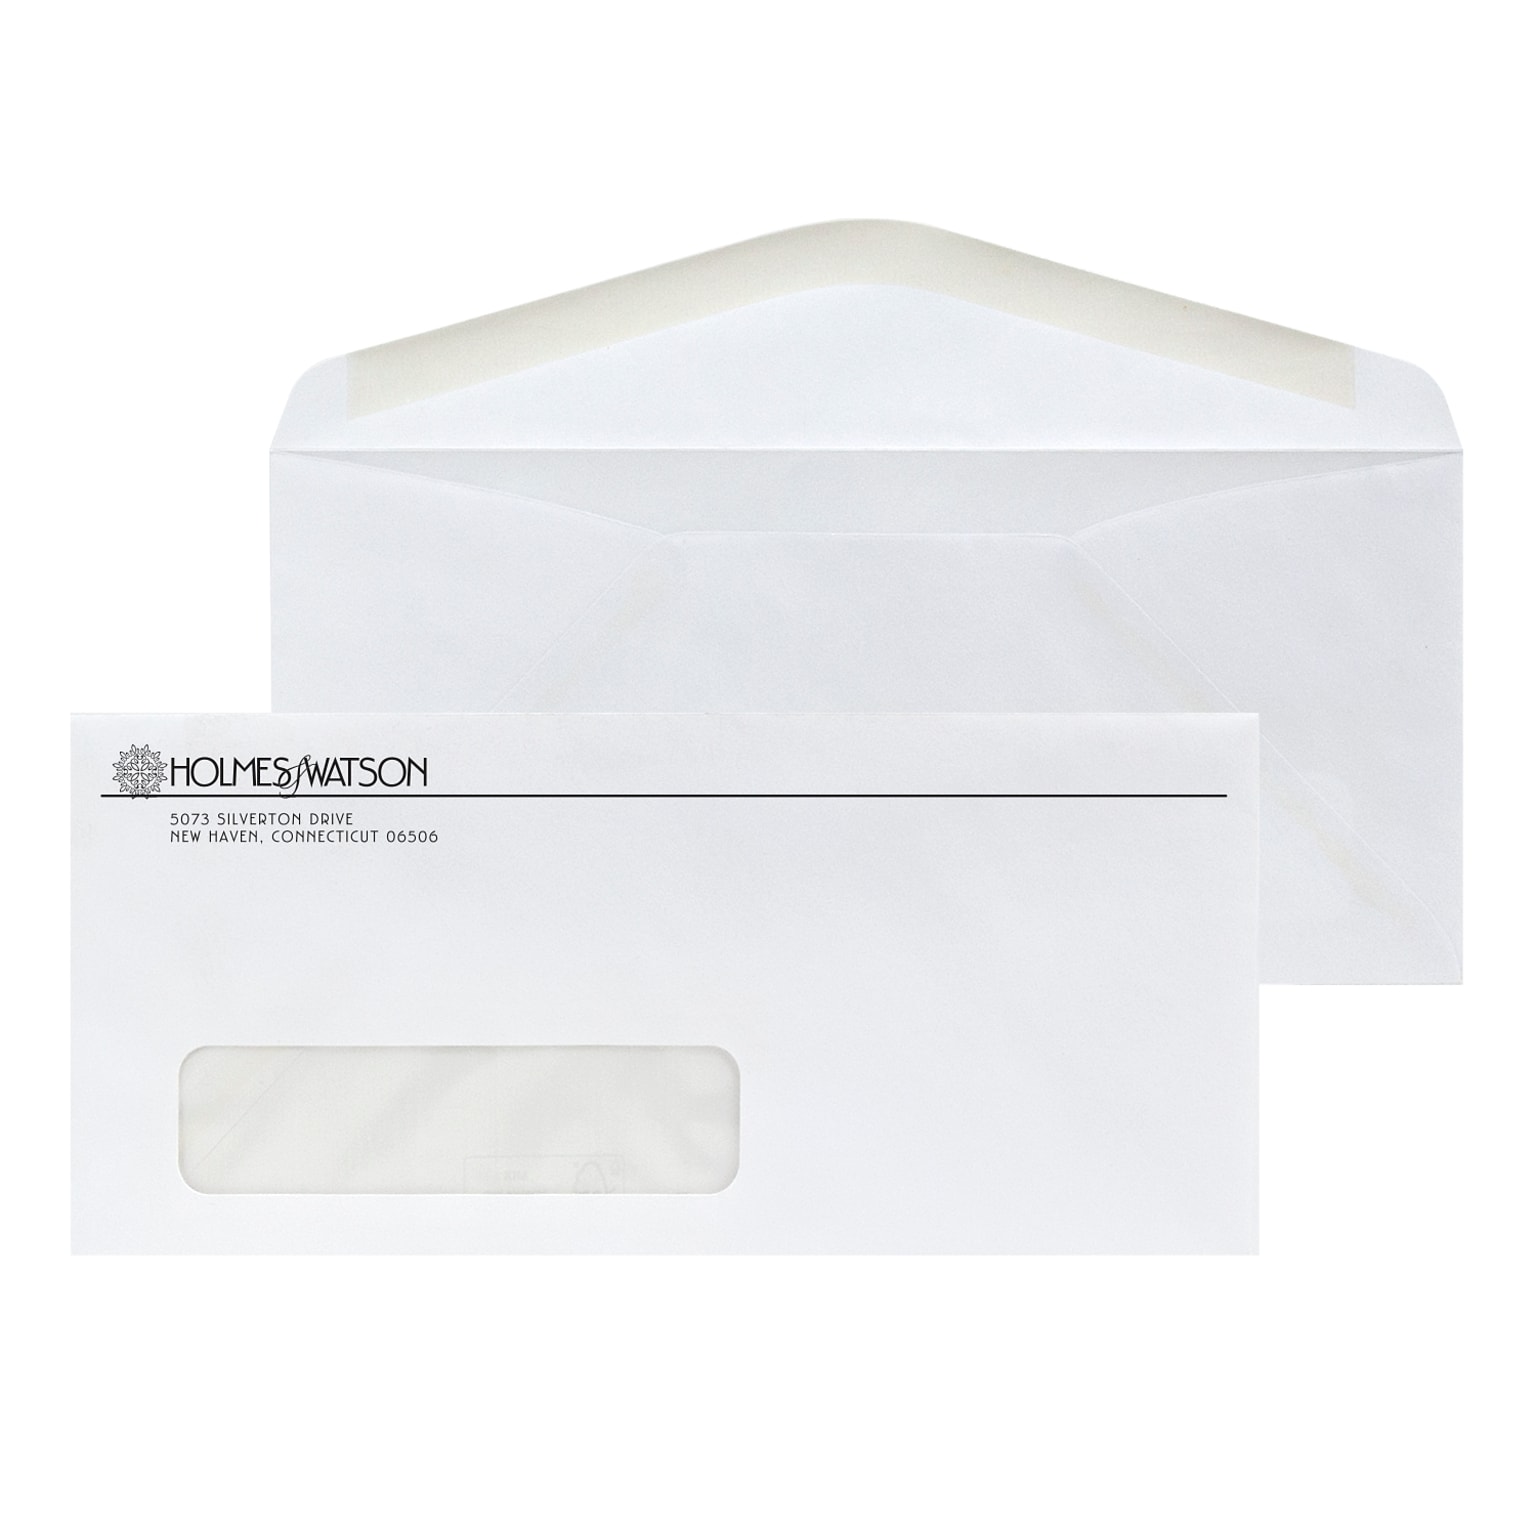 Custom #10 Window Envelopes, 4 1/4 x 9 1/2, Recycled 24# White Wove with EarthFirst/SFI Logo, 1 Standard Ink, 250 / Pack